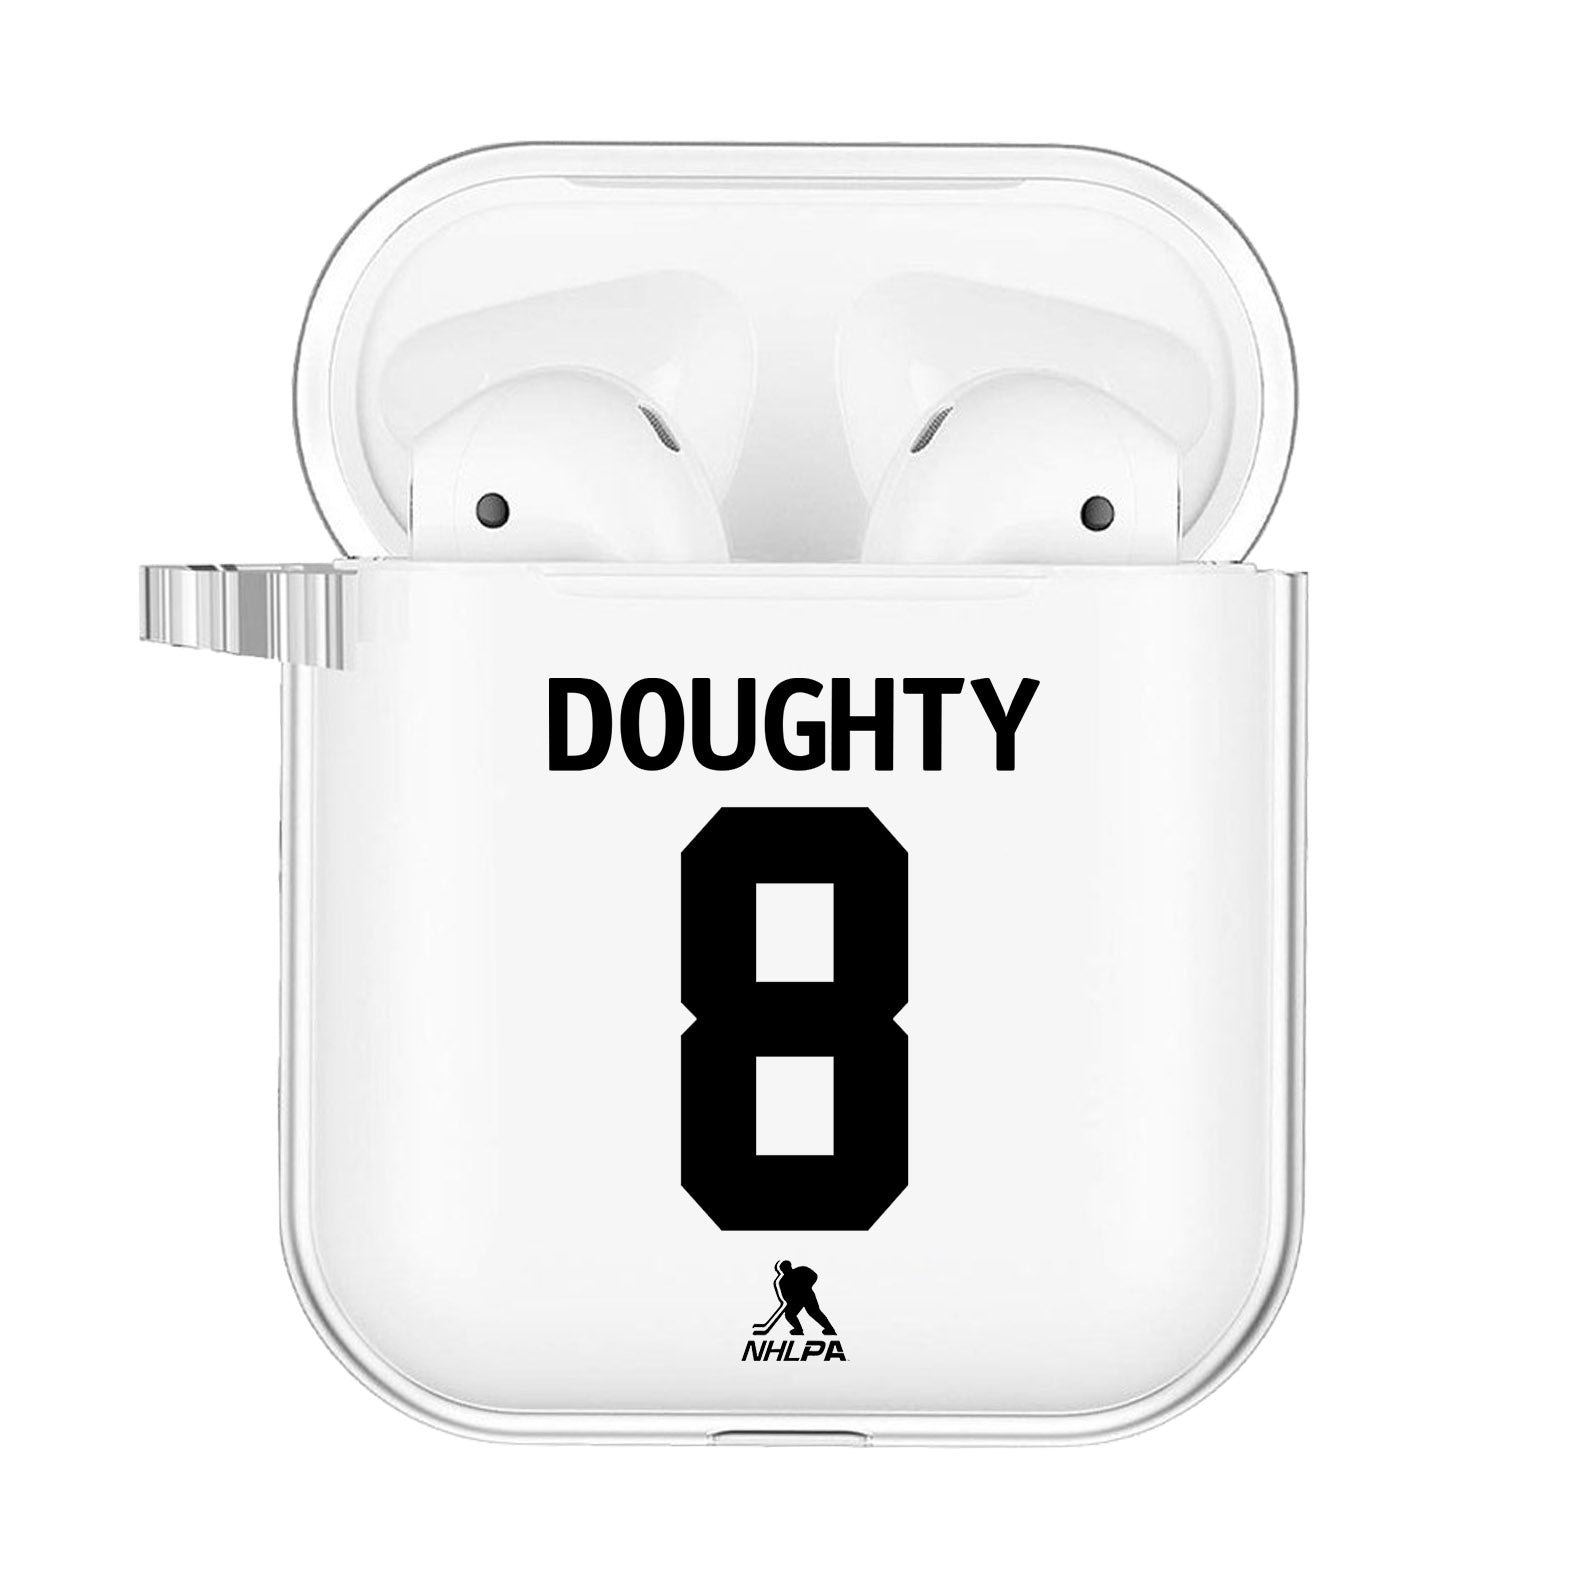 Los Angeles AirPod Cases